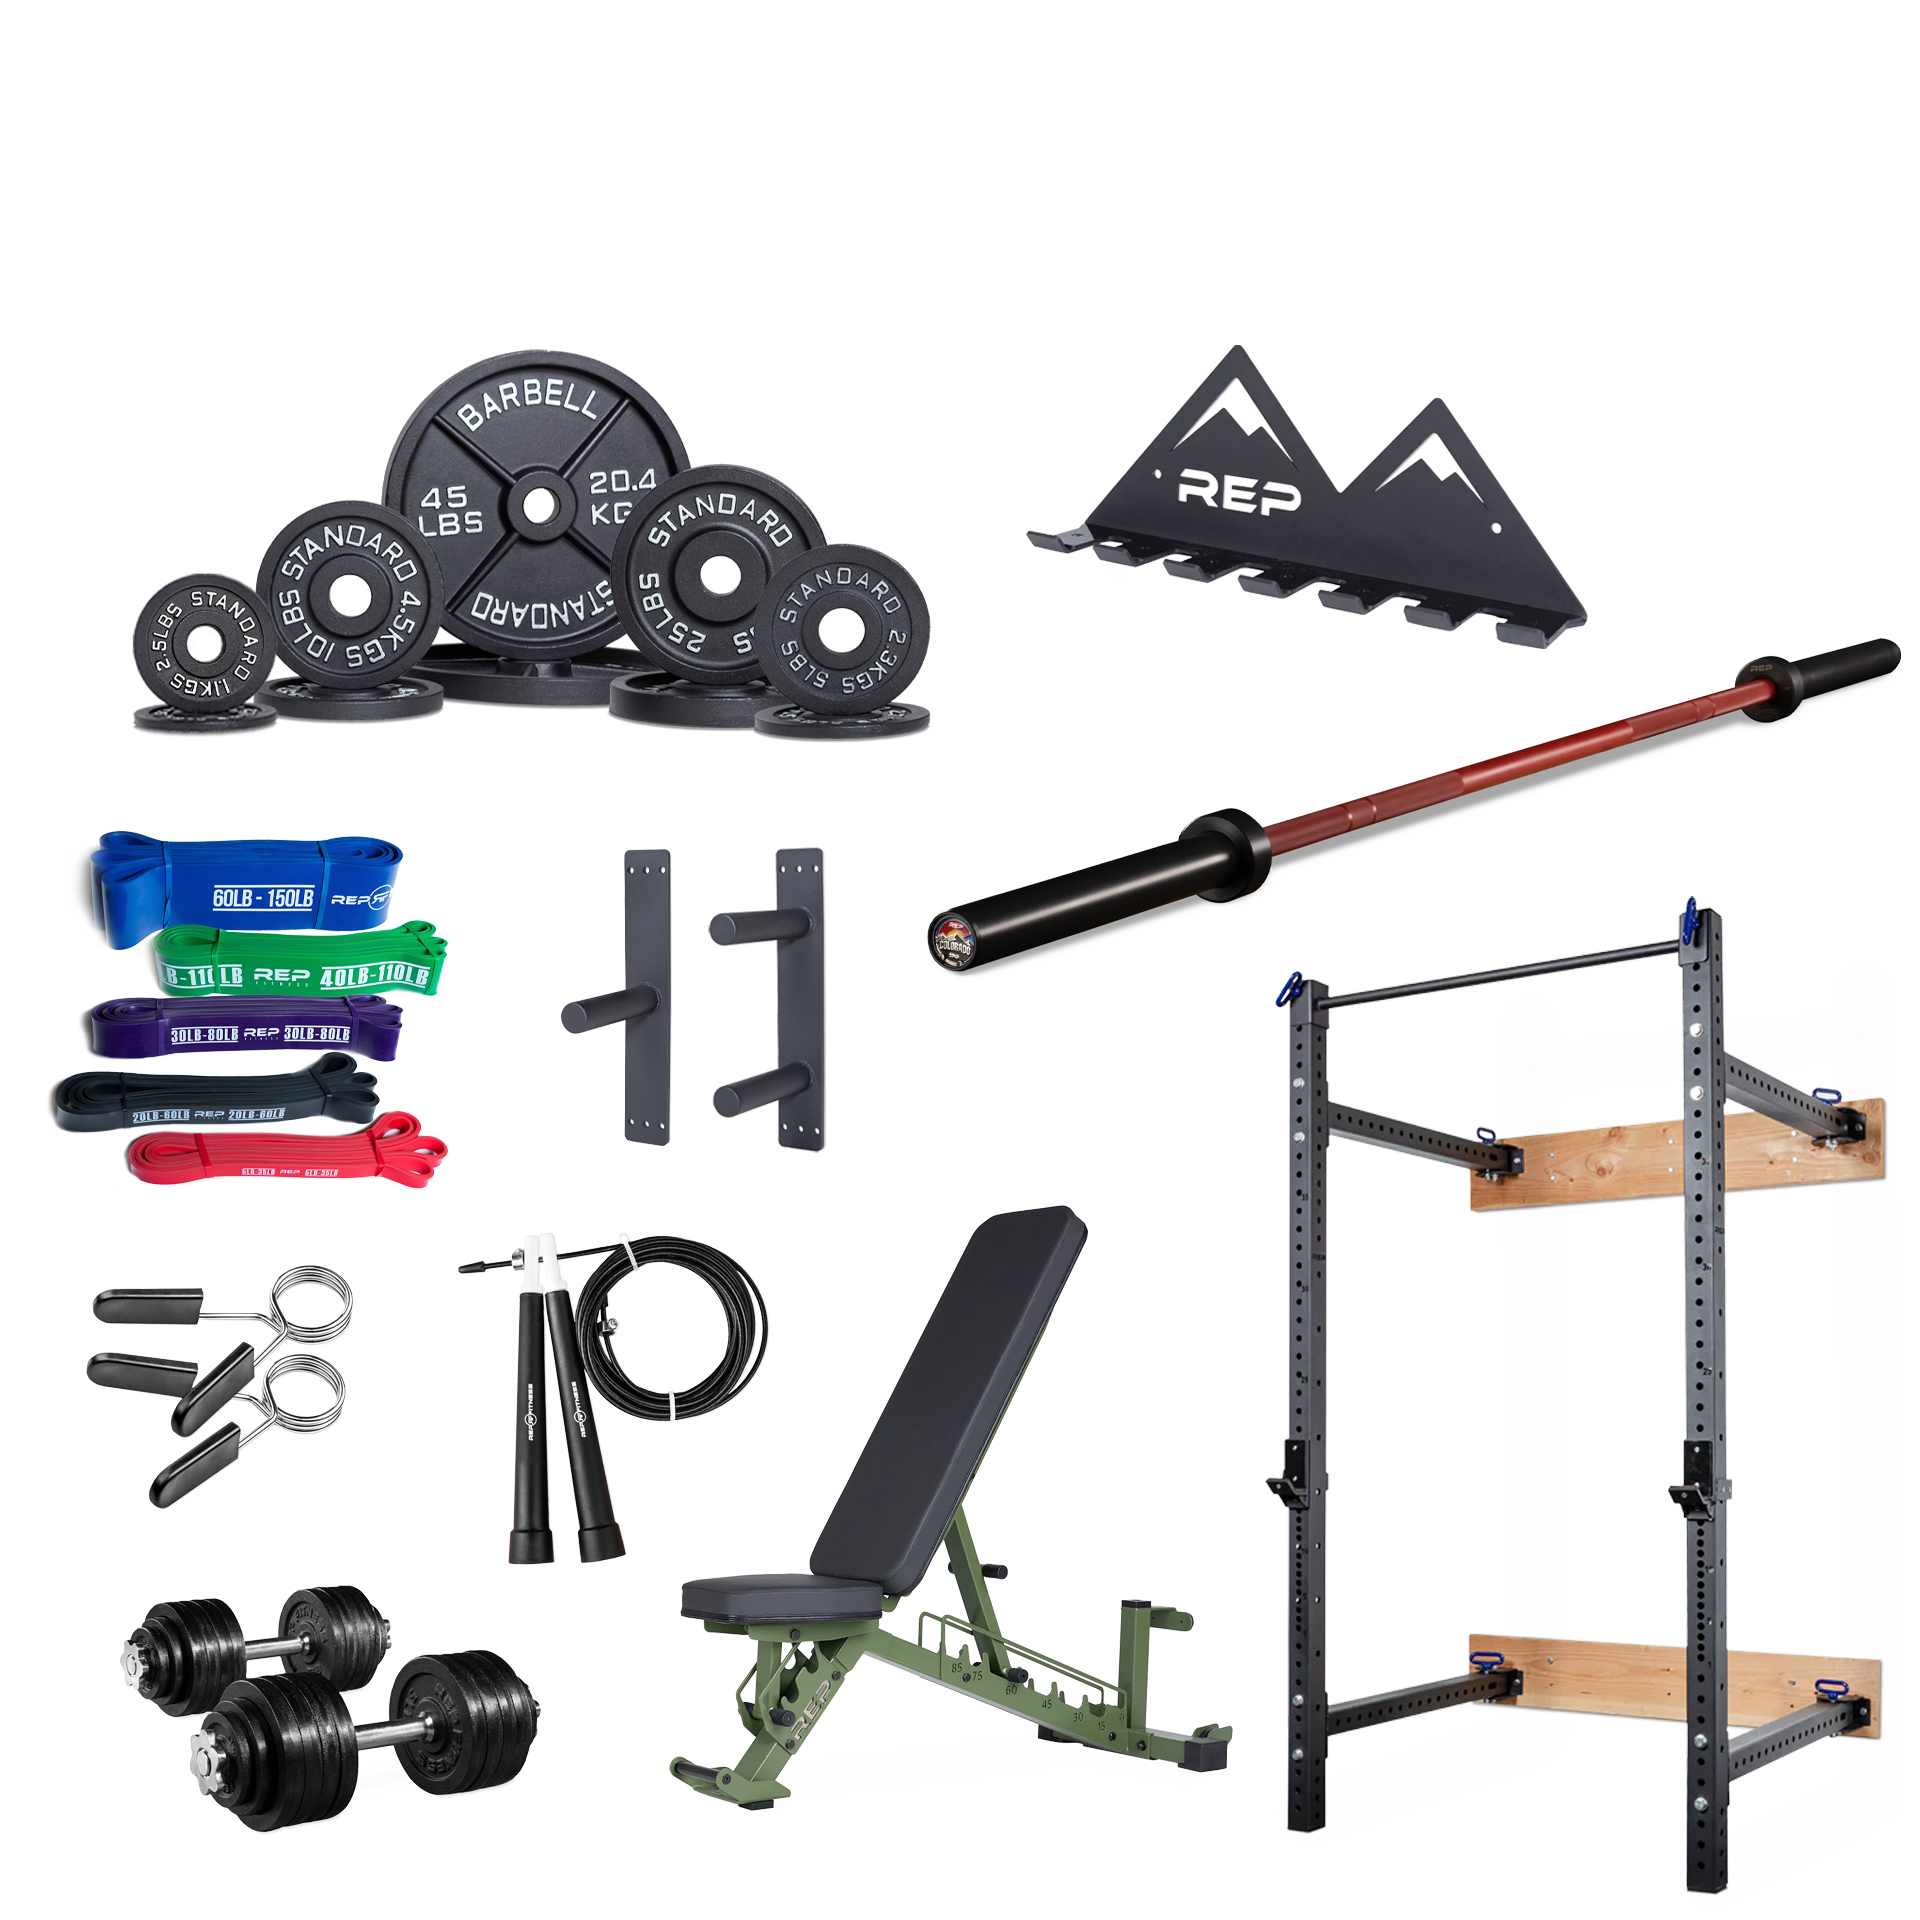 Ad - Homegym Set - training for all muscle groups - whole body training for  home - bench, dumbbells, stan